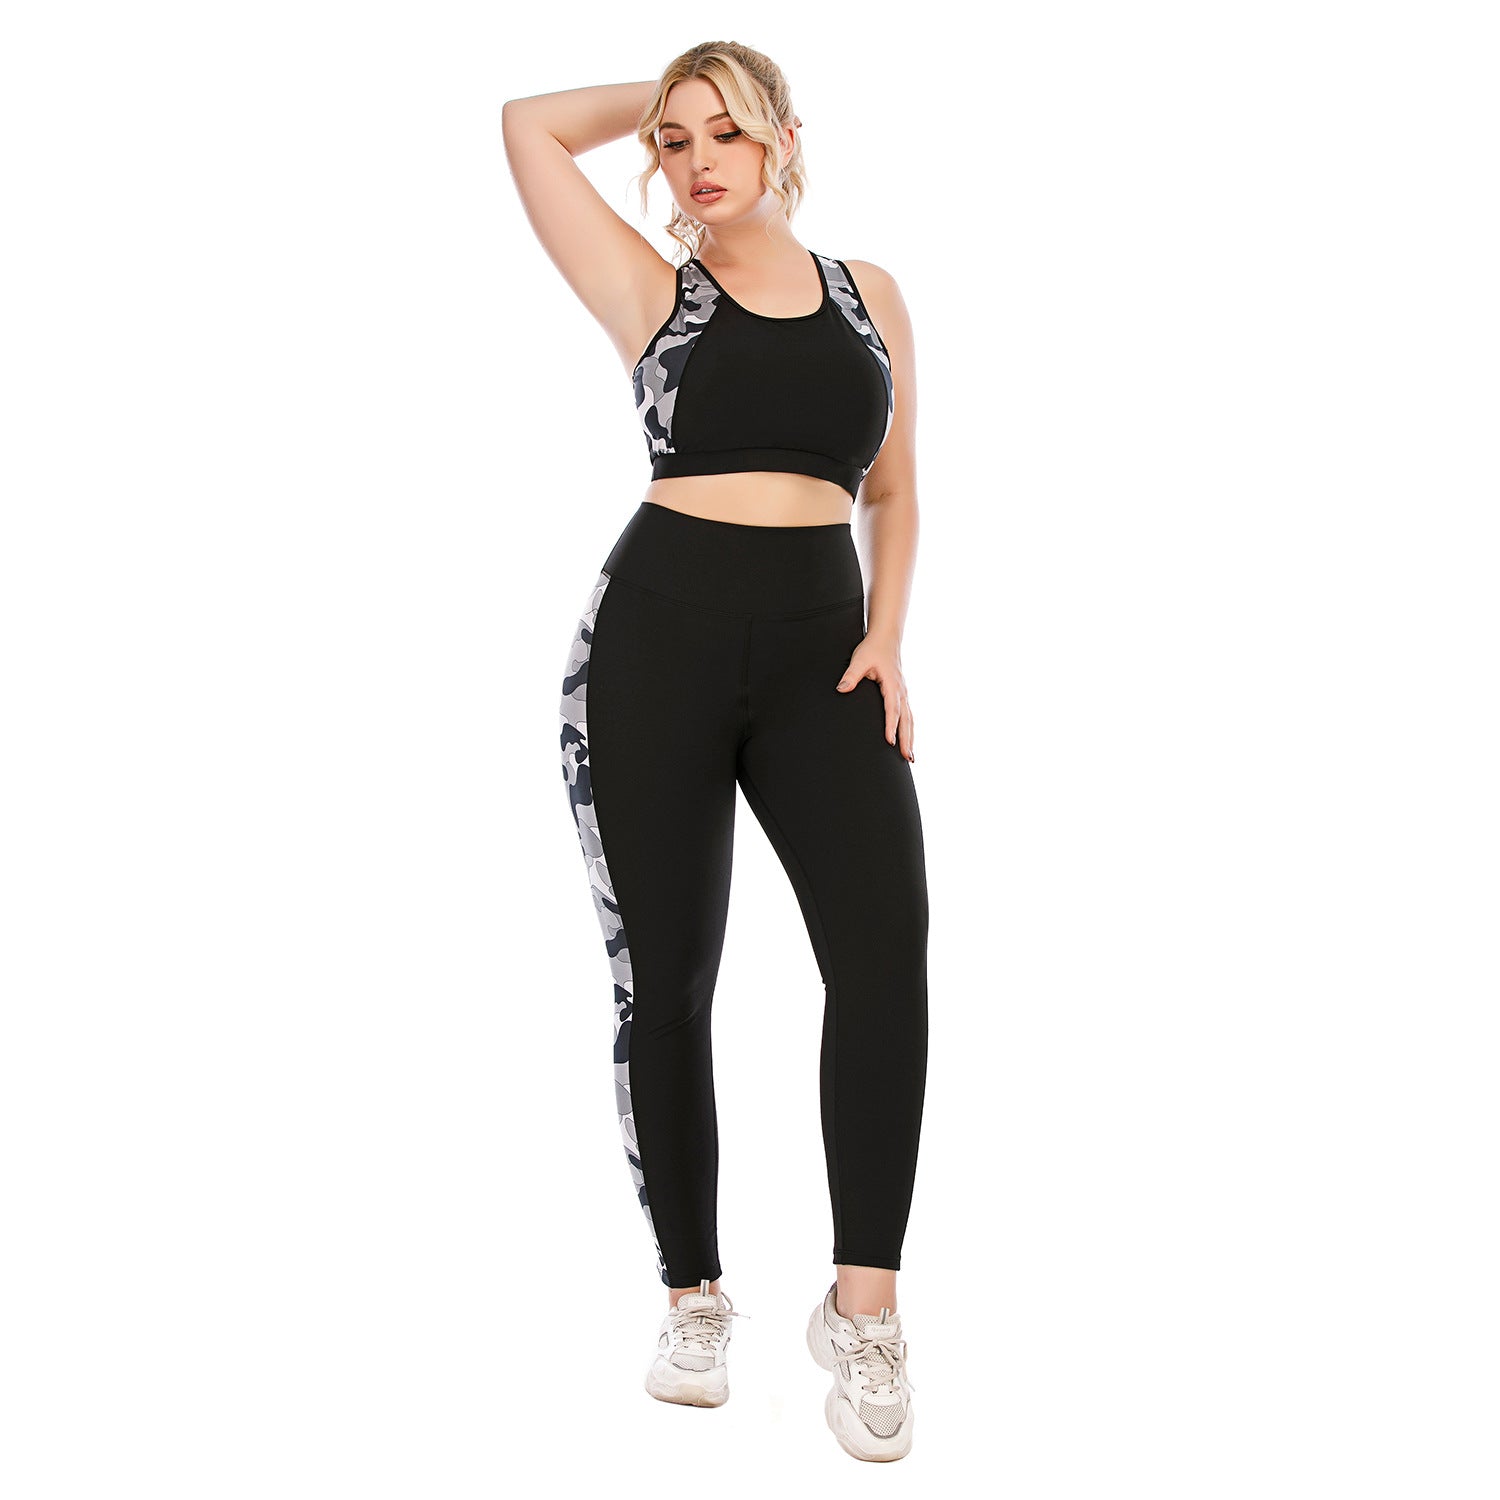 Plus Size Workout Sports Bra and Tights Set  Two Pieces Thecurvestory